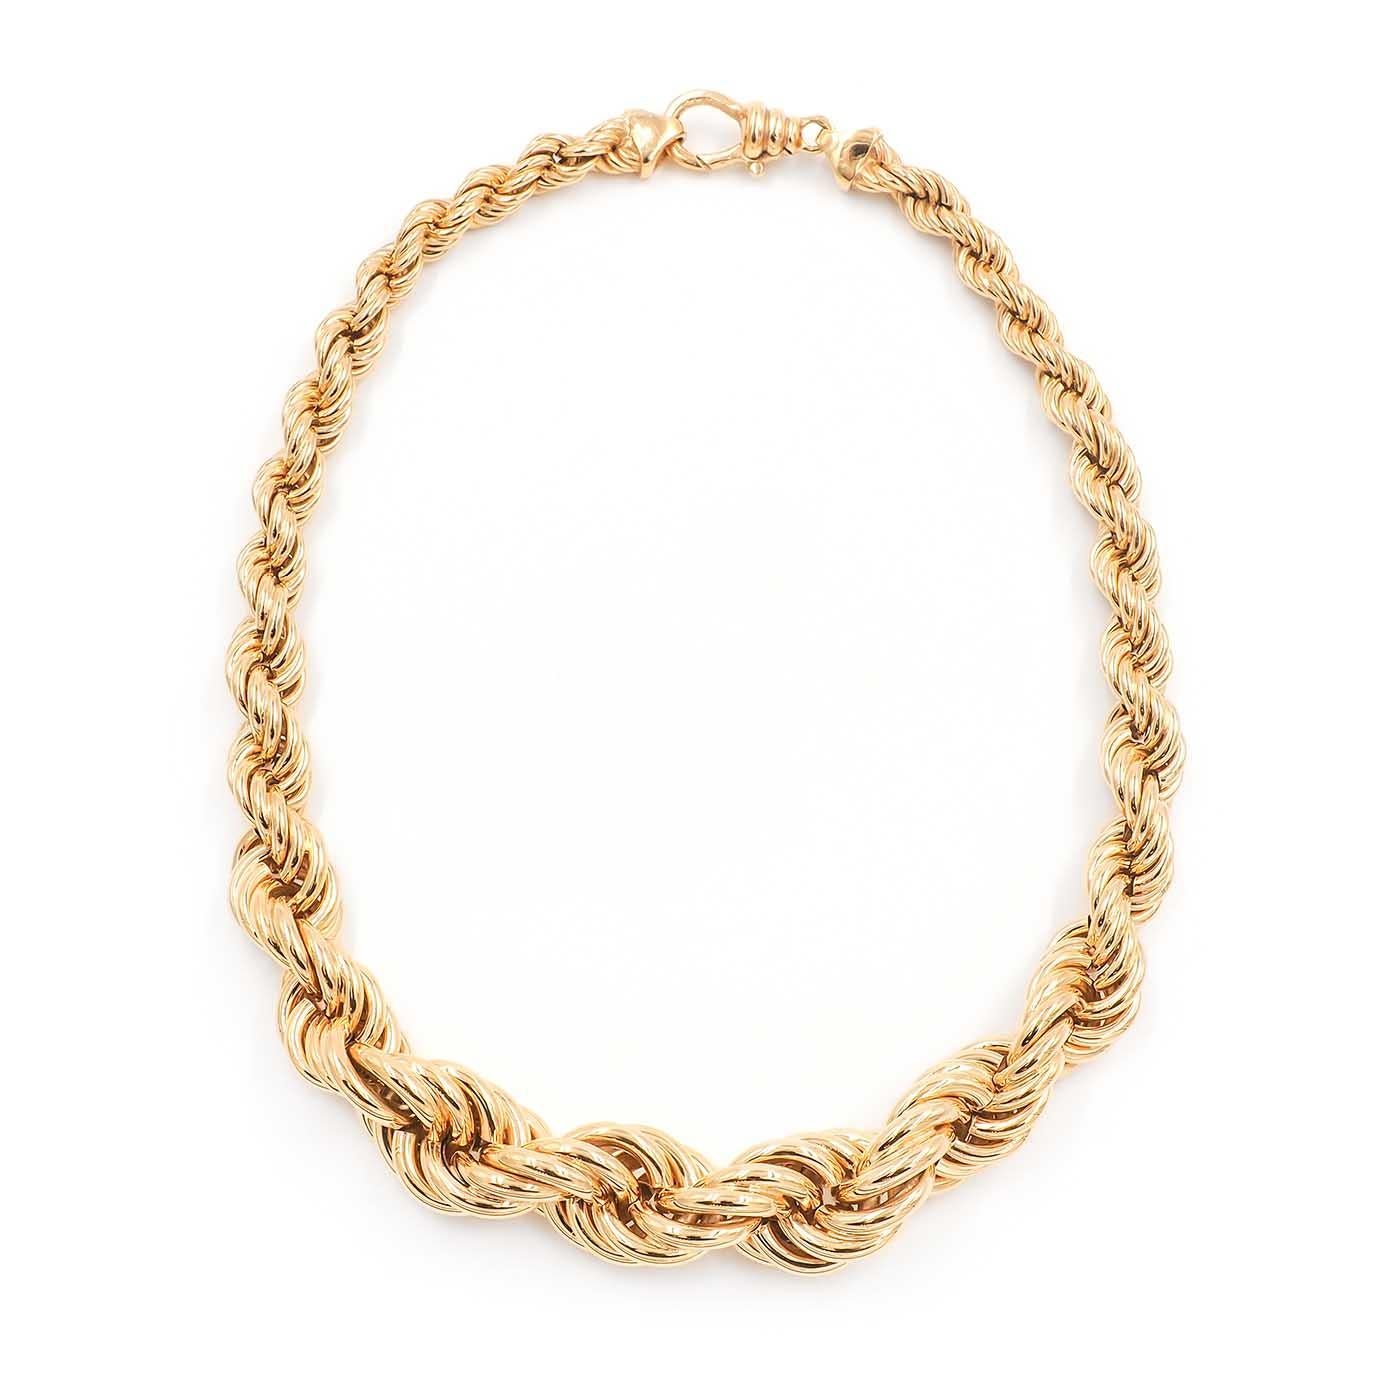 Vintage Graduated Twisted Rope Link Gold Chain Necklace composed of 18k yellow. With a twisted rope style link that is wider at the front and thinner at the back; measures approximately 16.5 mm wide at the front and 8 mm wide at the back. Necklace